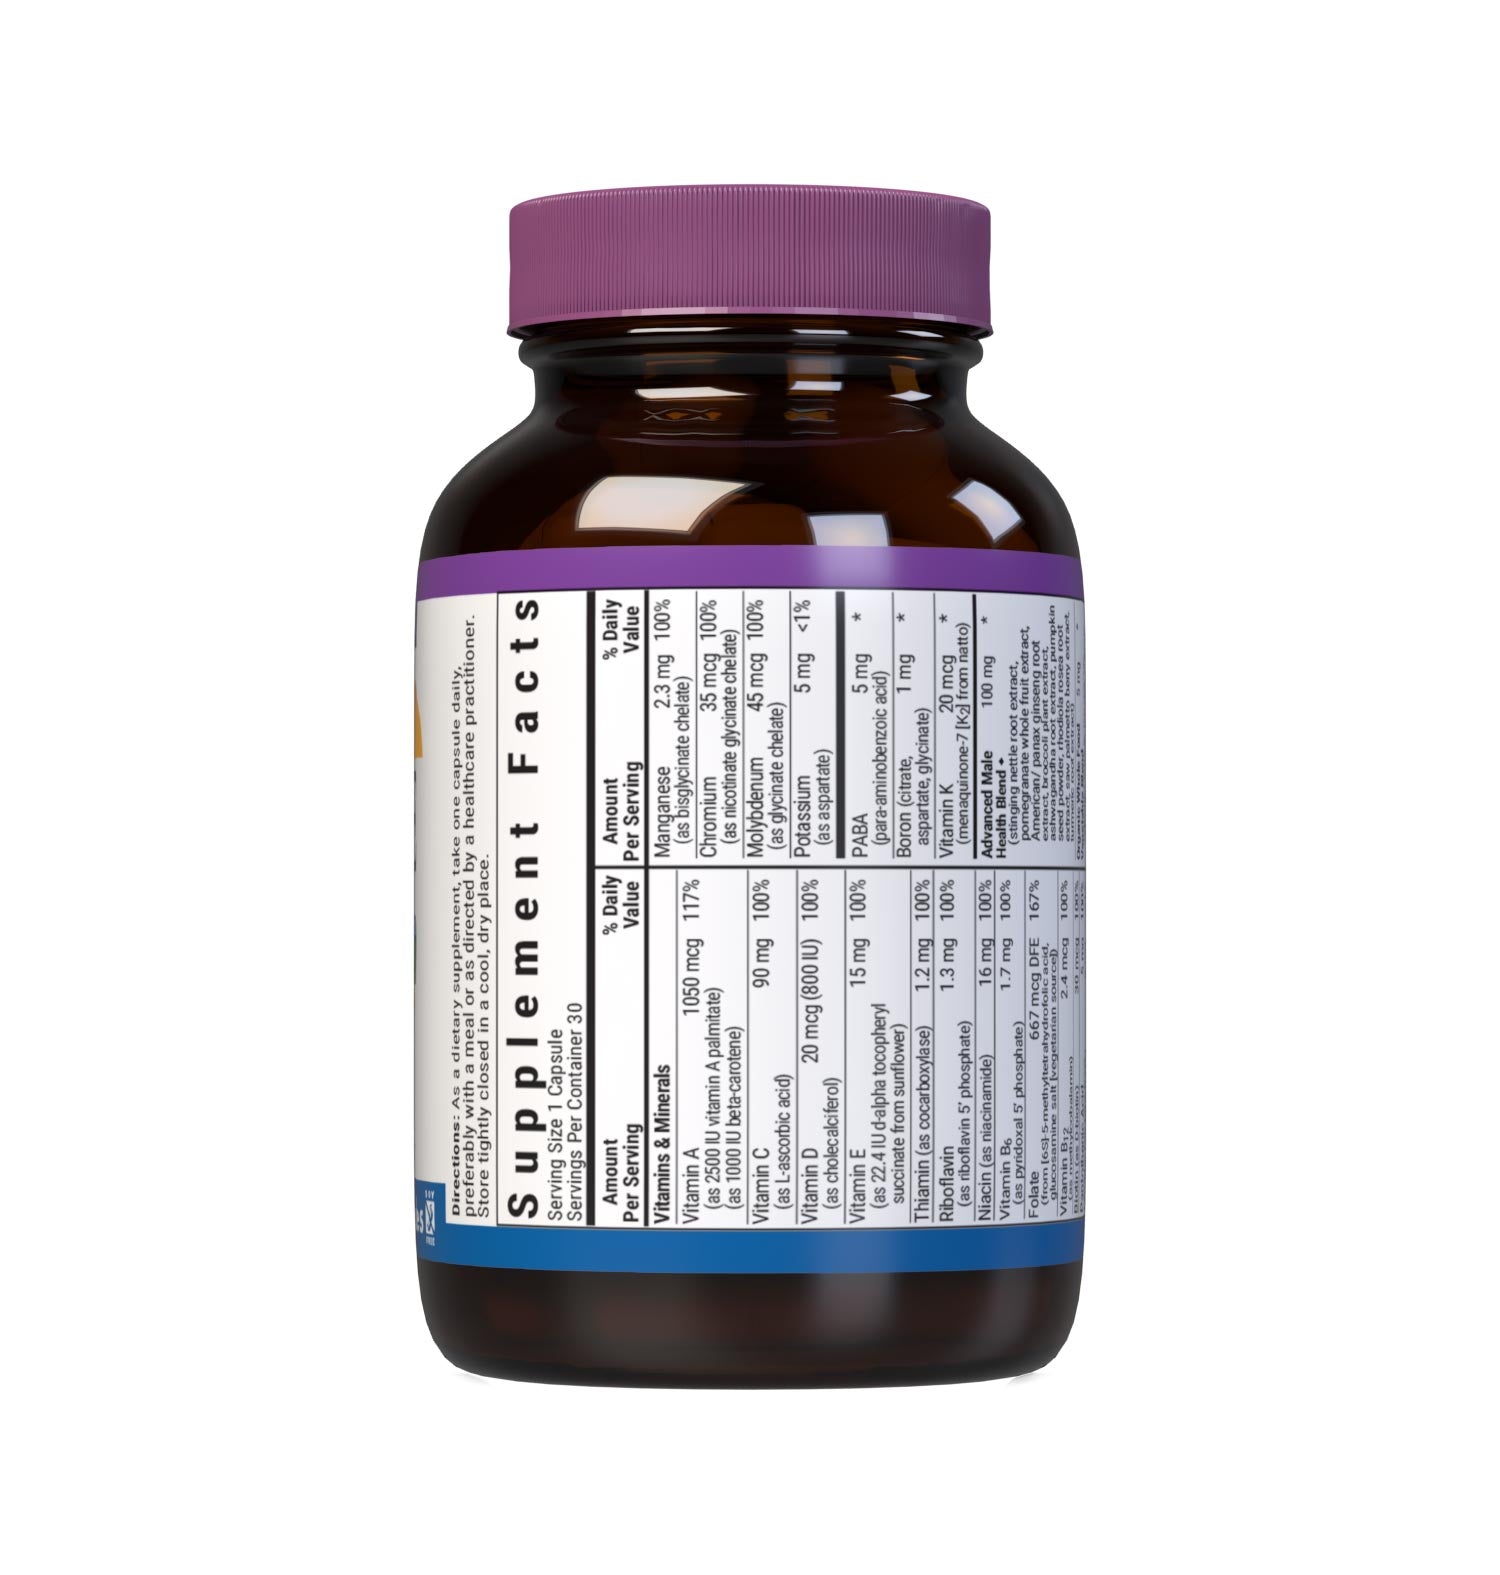 Bluebonnet’s Men's One Whole Food-Based Multiple 30 vegetable capsules is formulated with over 25 crucial nutrients like vitamin K2 and vitamin E from sunflower, all the coenzyme forms of the B vitamins, plus Albion chelated minerals in addition to an organic whole food vegetable blend, a plant-sourced enzyme blend, and a unique male health blend for daily nutrition and well being. Supplement facts panel part1. #size_30 count